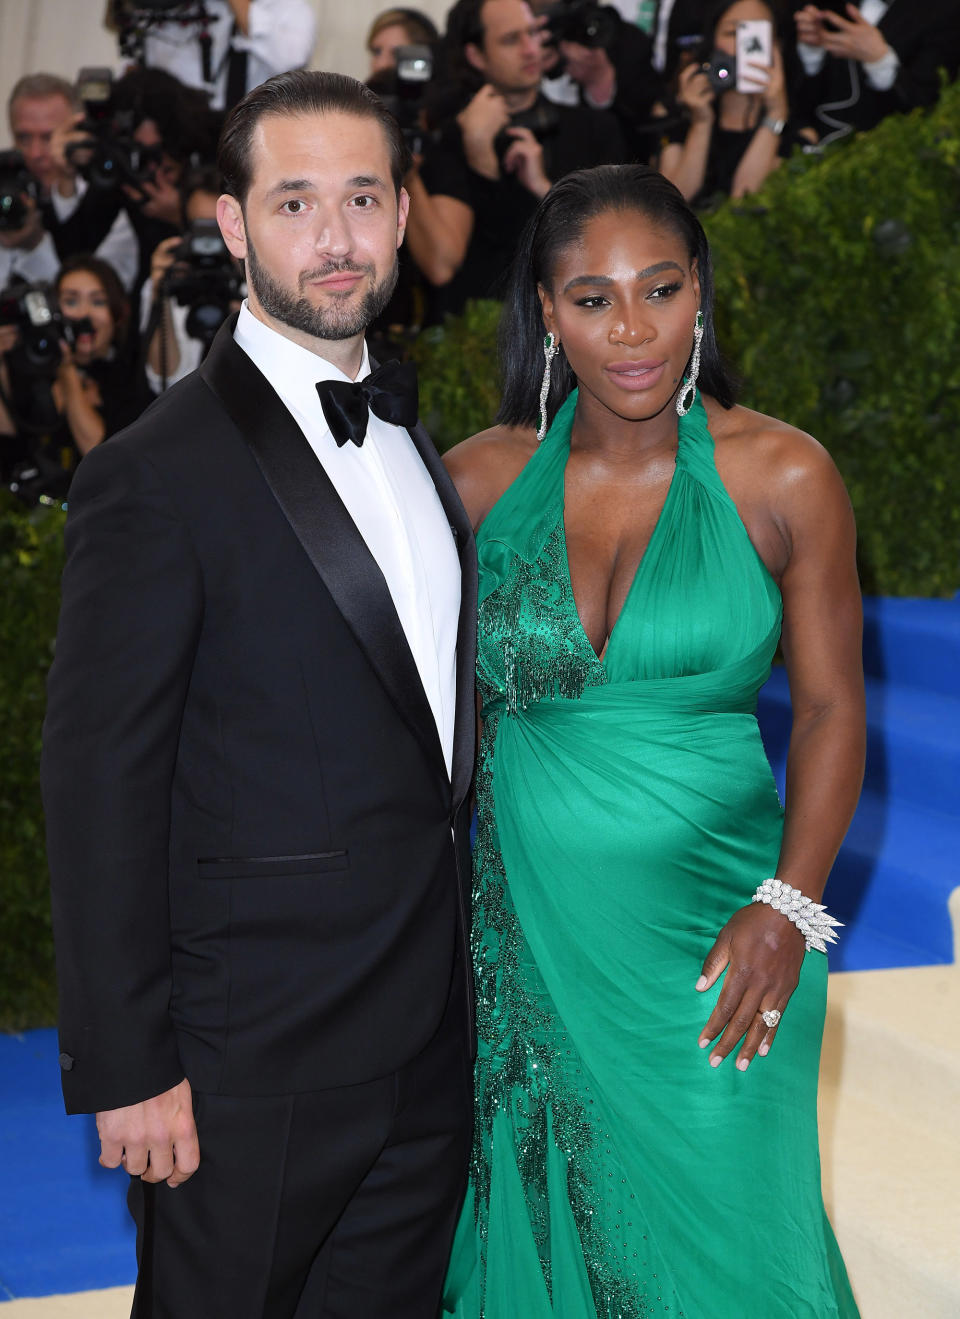 Alexis Ohanian and Serena Williams hit the red carpet. (Photo by Karwai Tang/WireImage)